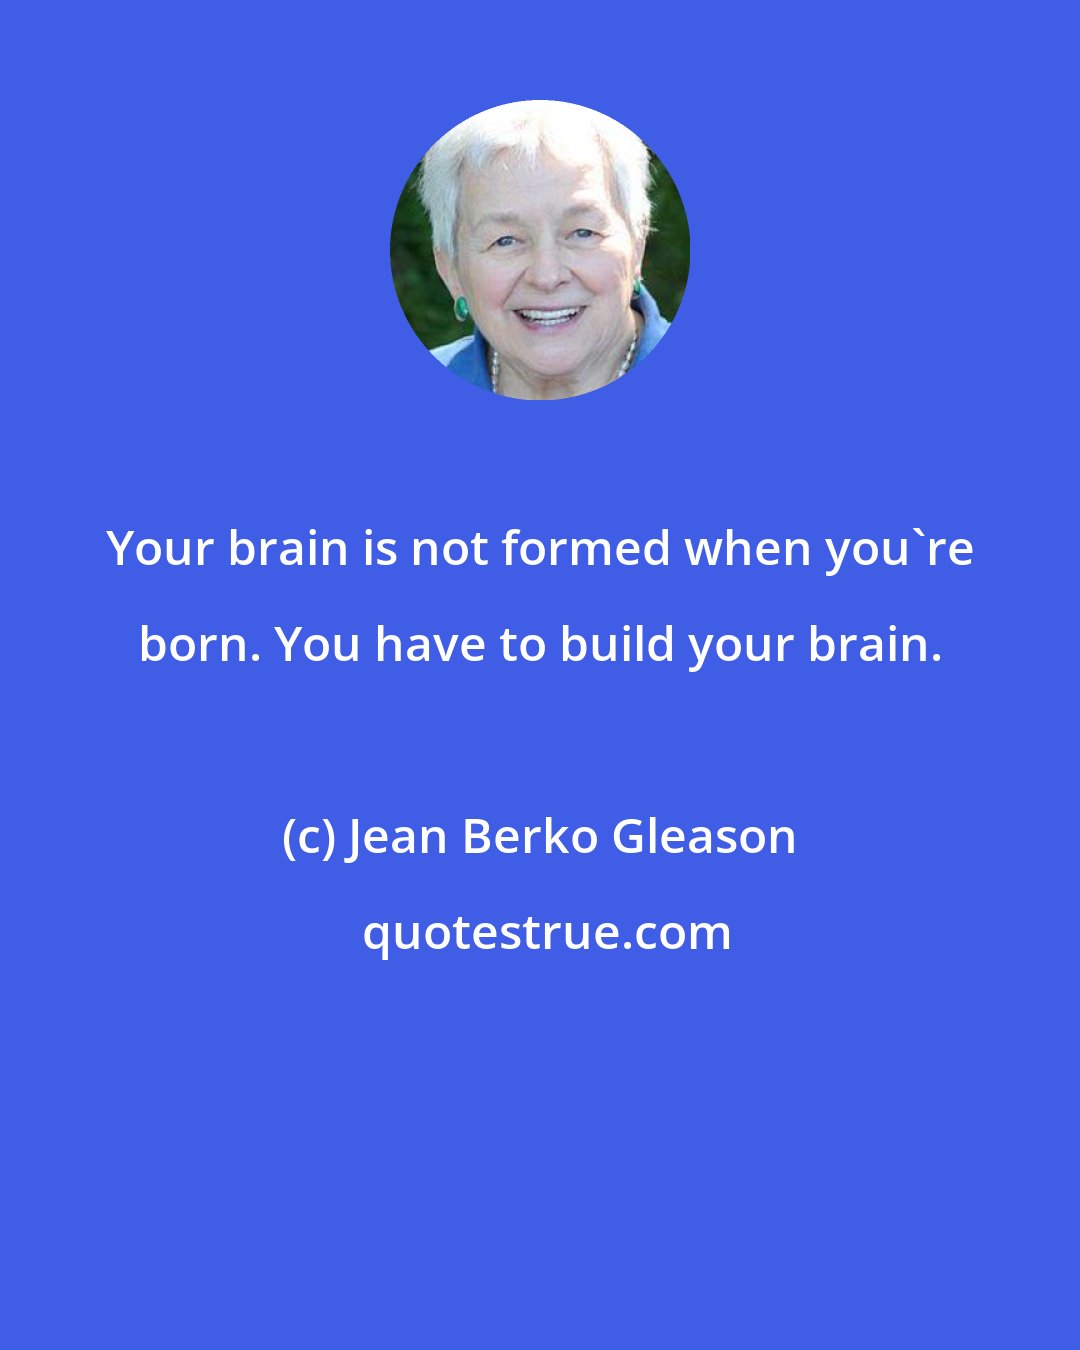 Jean Berko Gleason: Your brain is not formed when you're born. You have to build your brain.